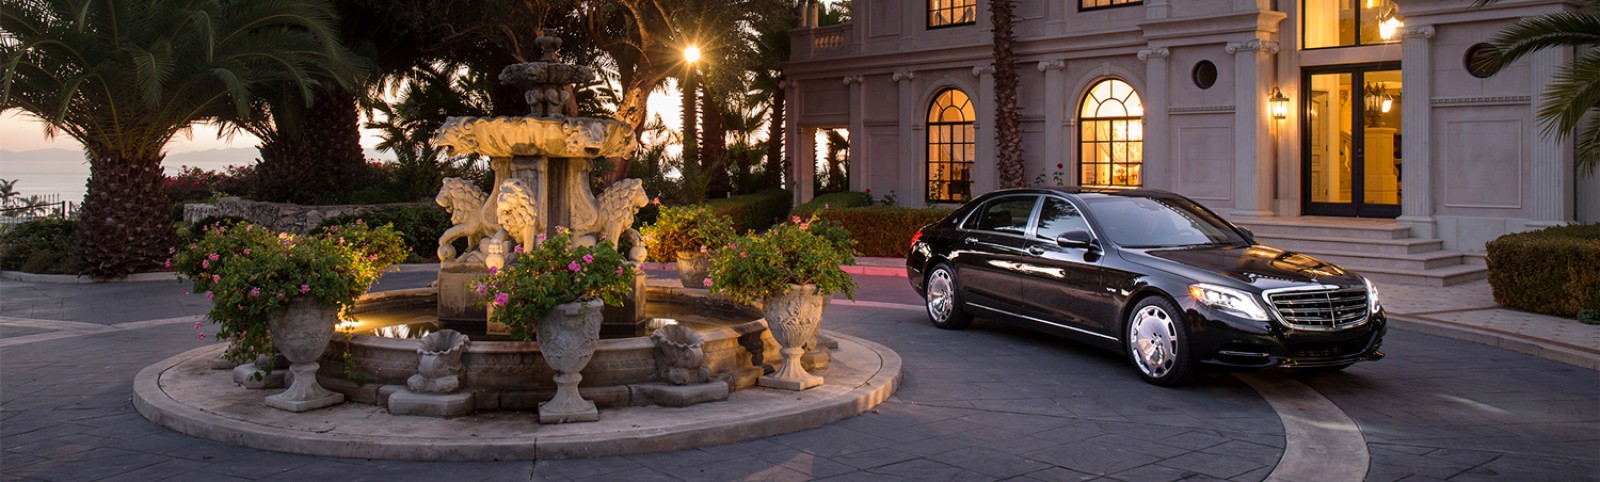 Private Chauffeur in Cannes - Premium Vehicles & Services - Reactivity 24/7 - Ruby Services - Car Rental with Driver in Cannes